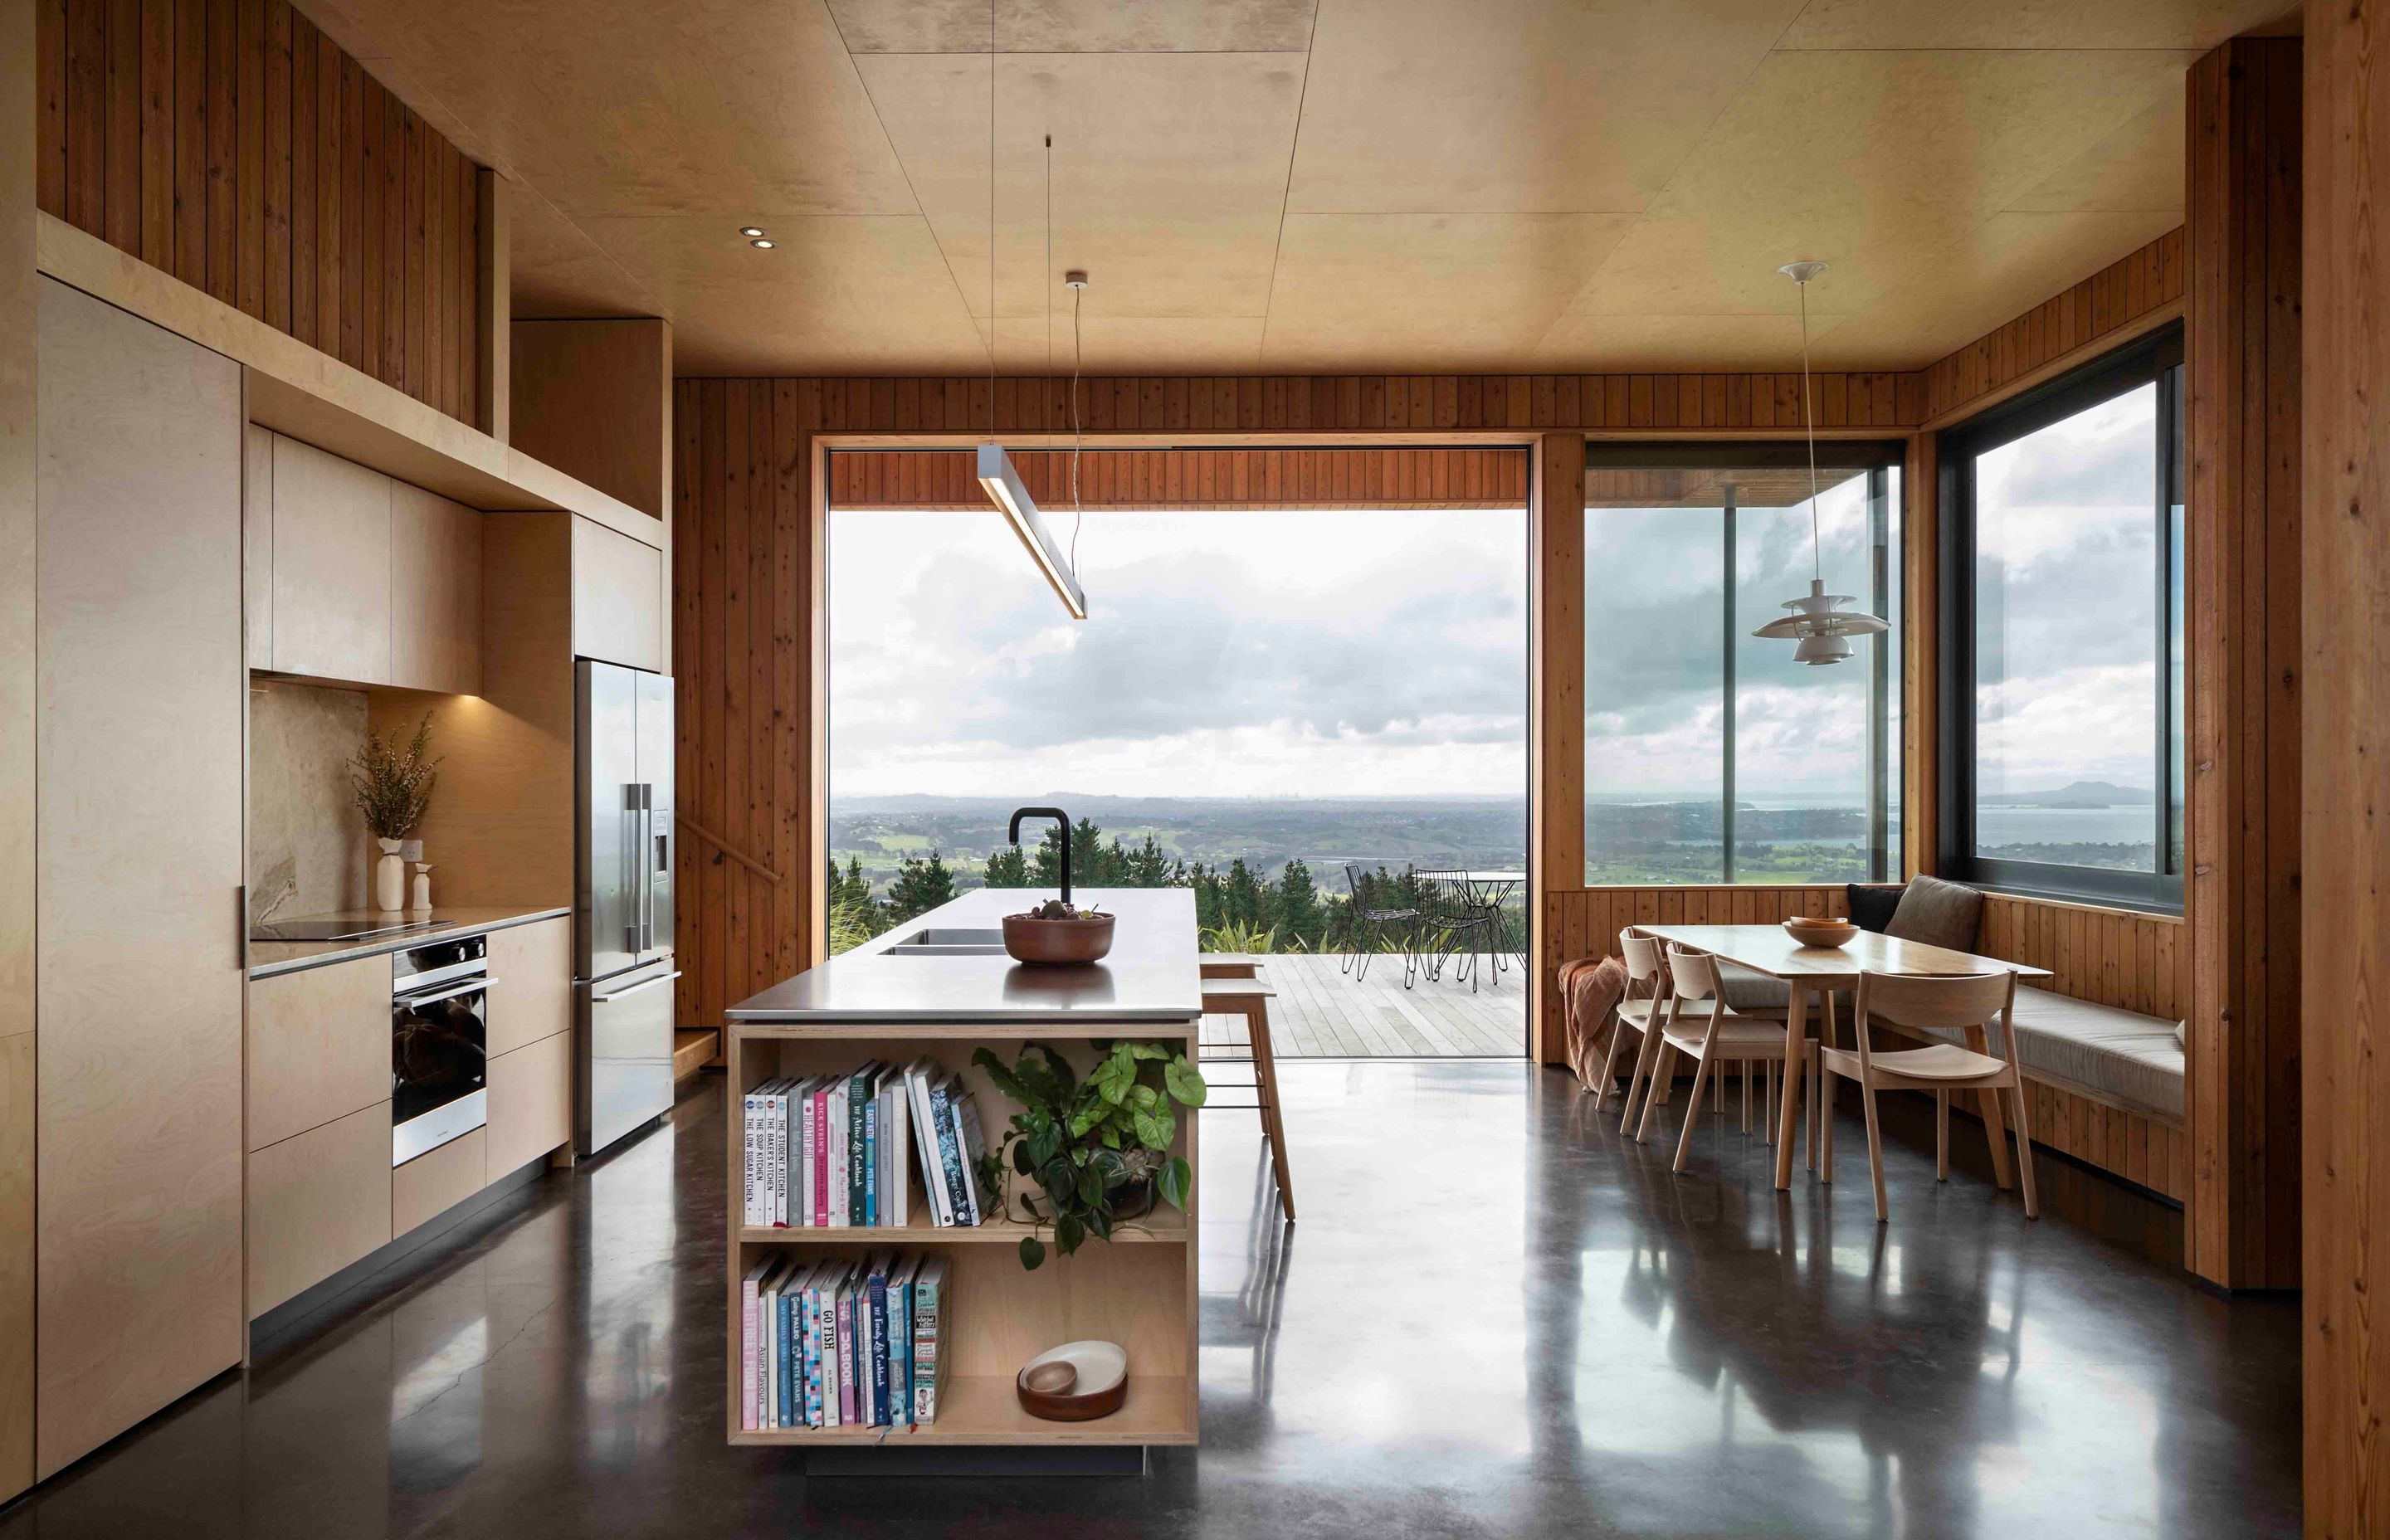 Birch plywood lines the ceiling of the kitchen, creating a biophilic tie to the outdoor spaces.